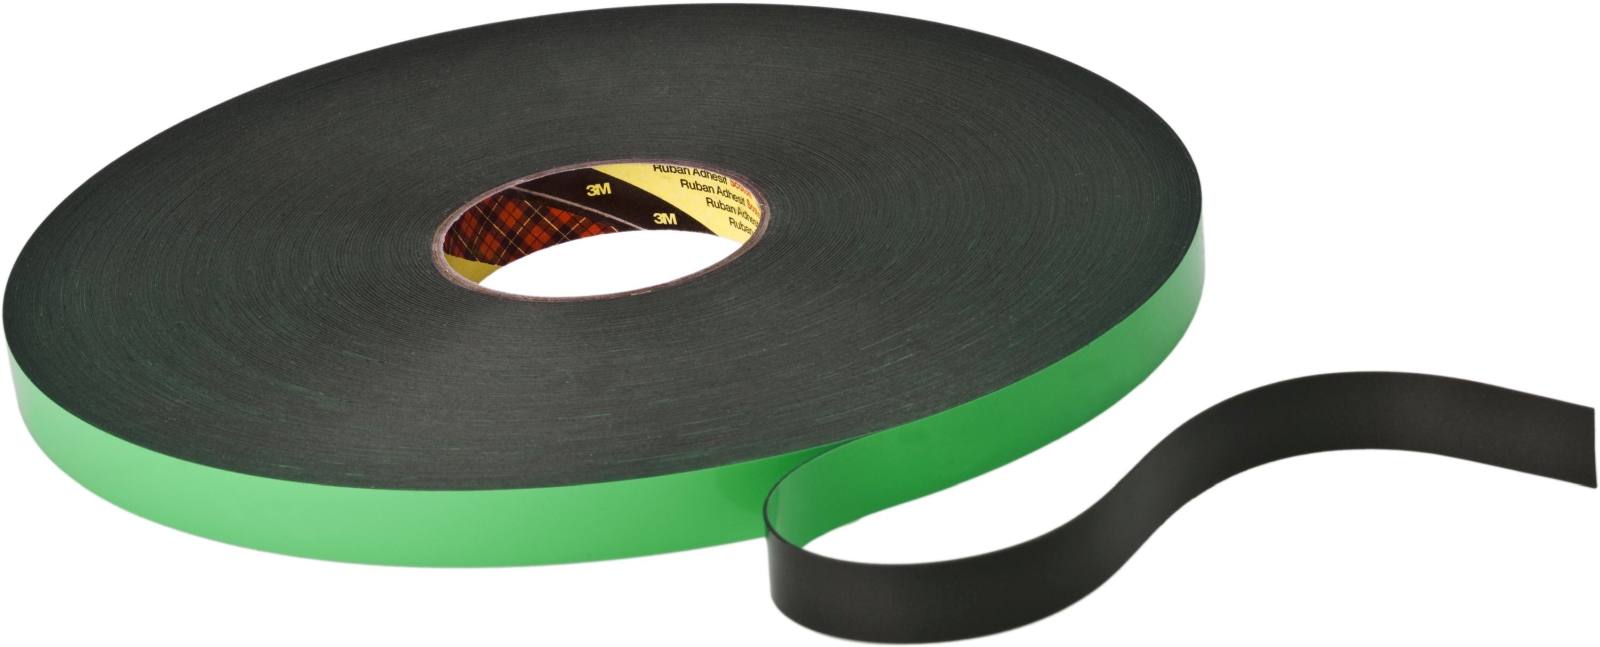 3M Double-sided PE foam tape with acrylic adhesive 9515B, black, 1500 mm x 33 m, 1.5 mm